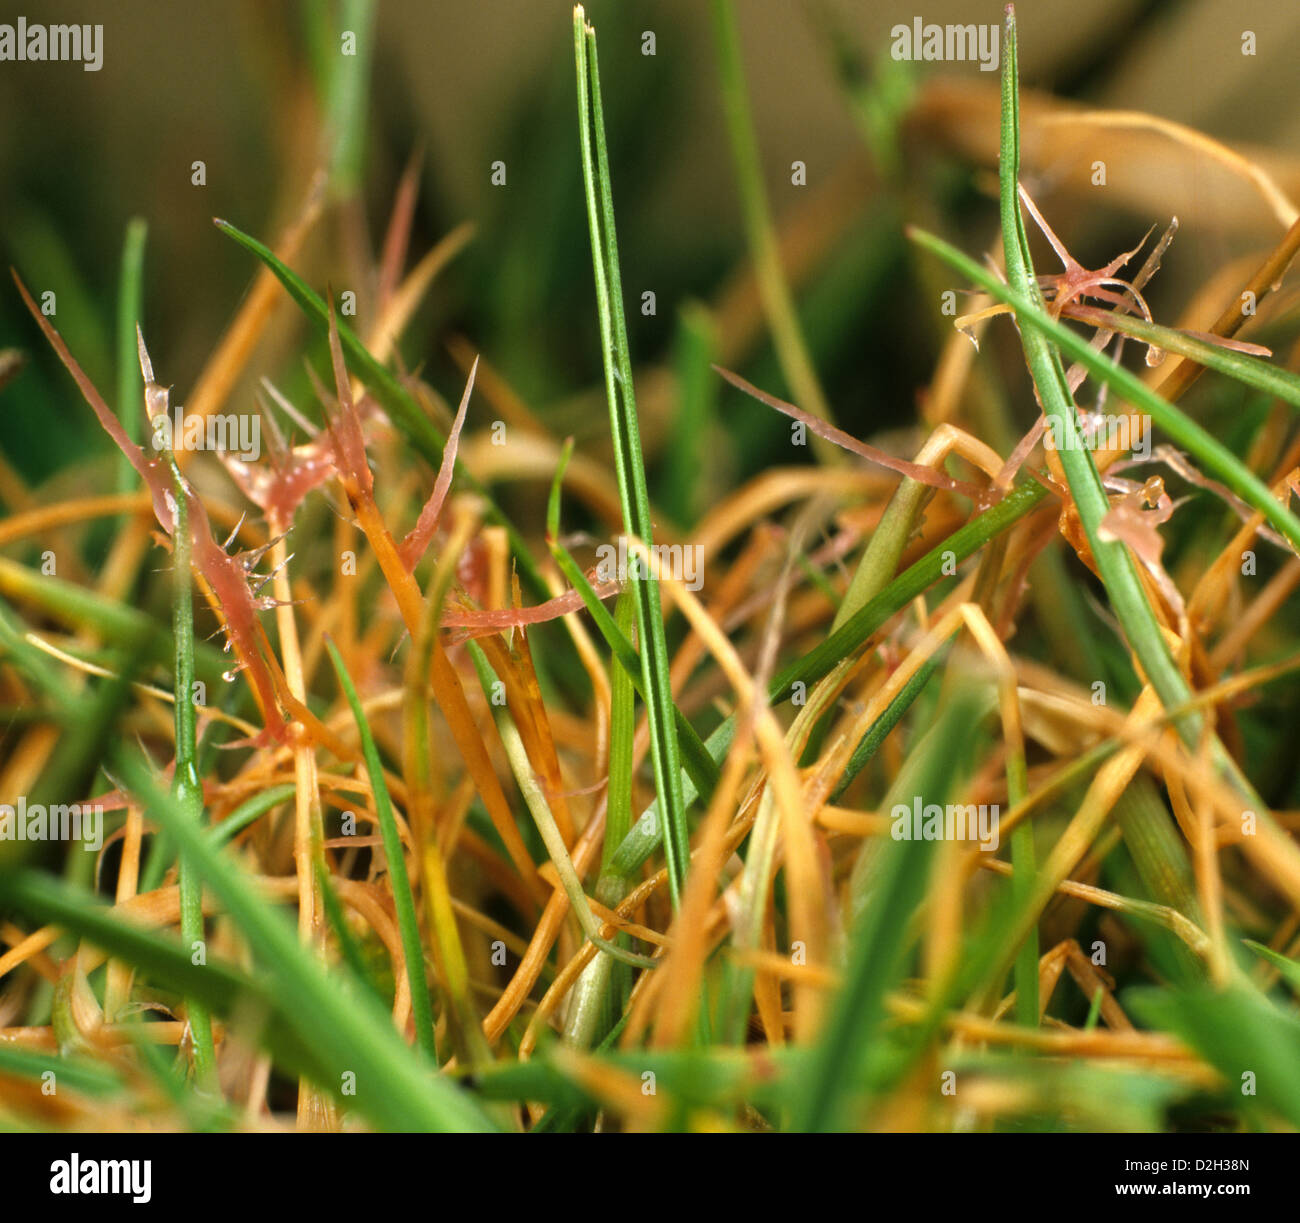 Turf grass with red thread, Laetisaria fuciformis, disease strands or threads on leaves Stock Photo